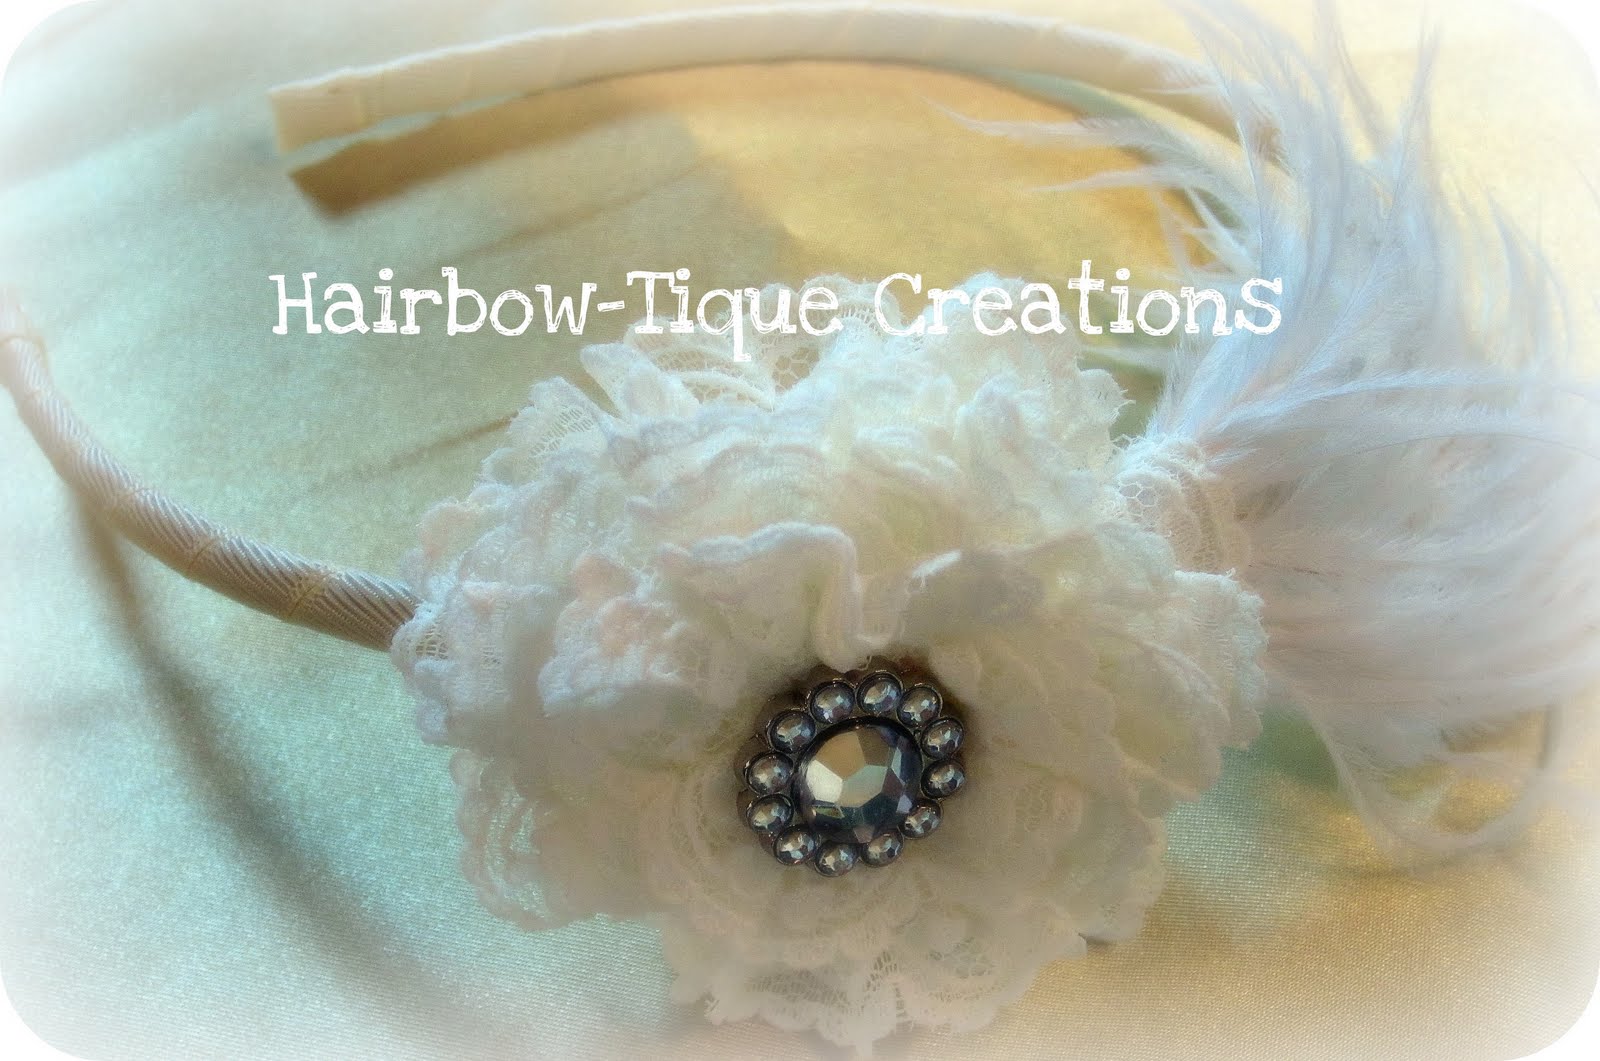 Hairbow-tique Creations